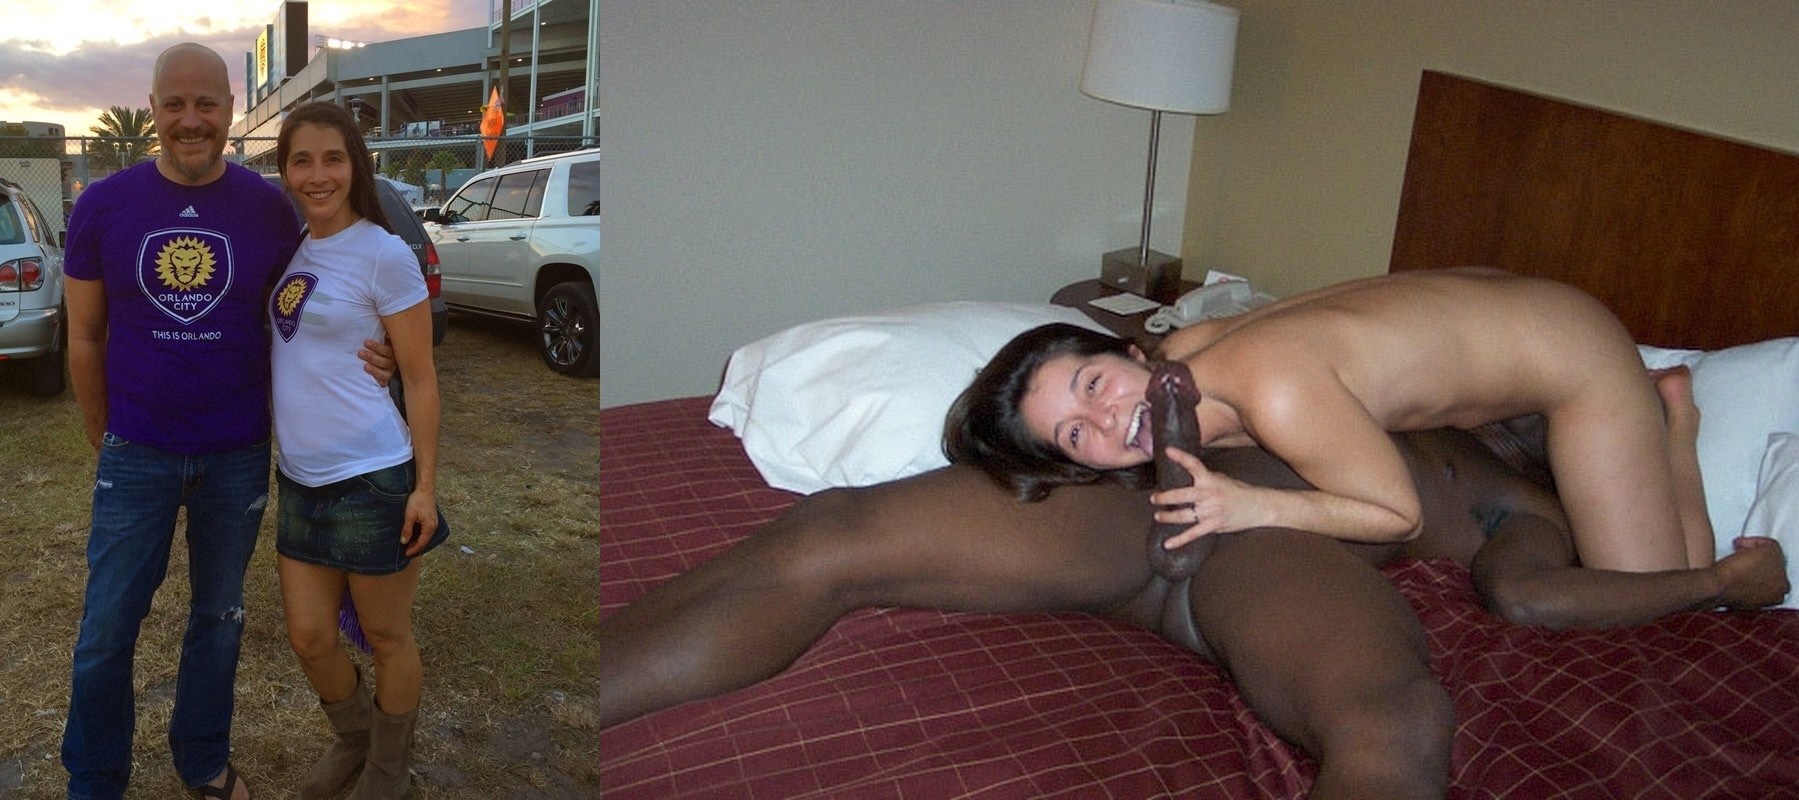 Archive of the Wife and Her Fuck on a Business Trip (67 photos) image picture